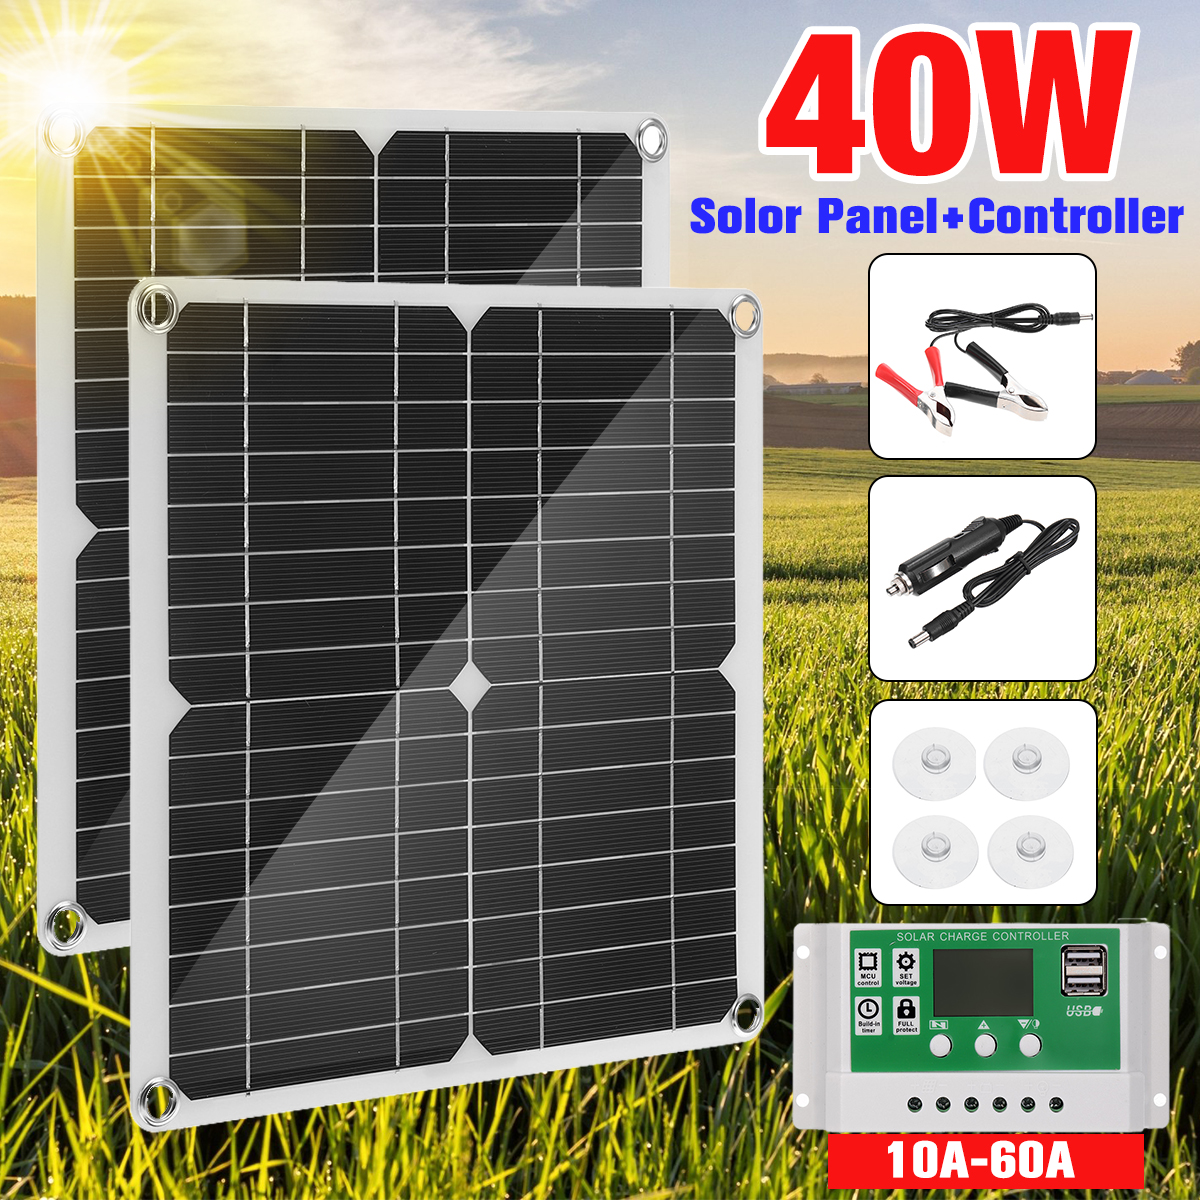 40W-Solar-Panel-Dual-USB-30A-Controller-Solar-Cell-for-Yacht-RV-Battery-Charger-1830193-1